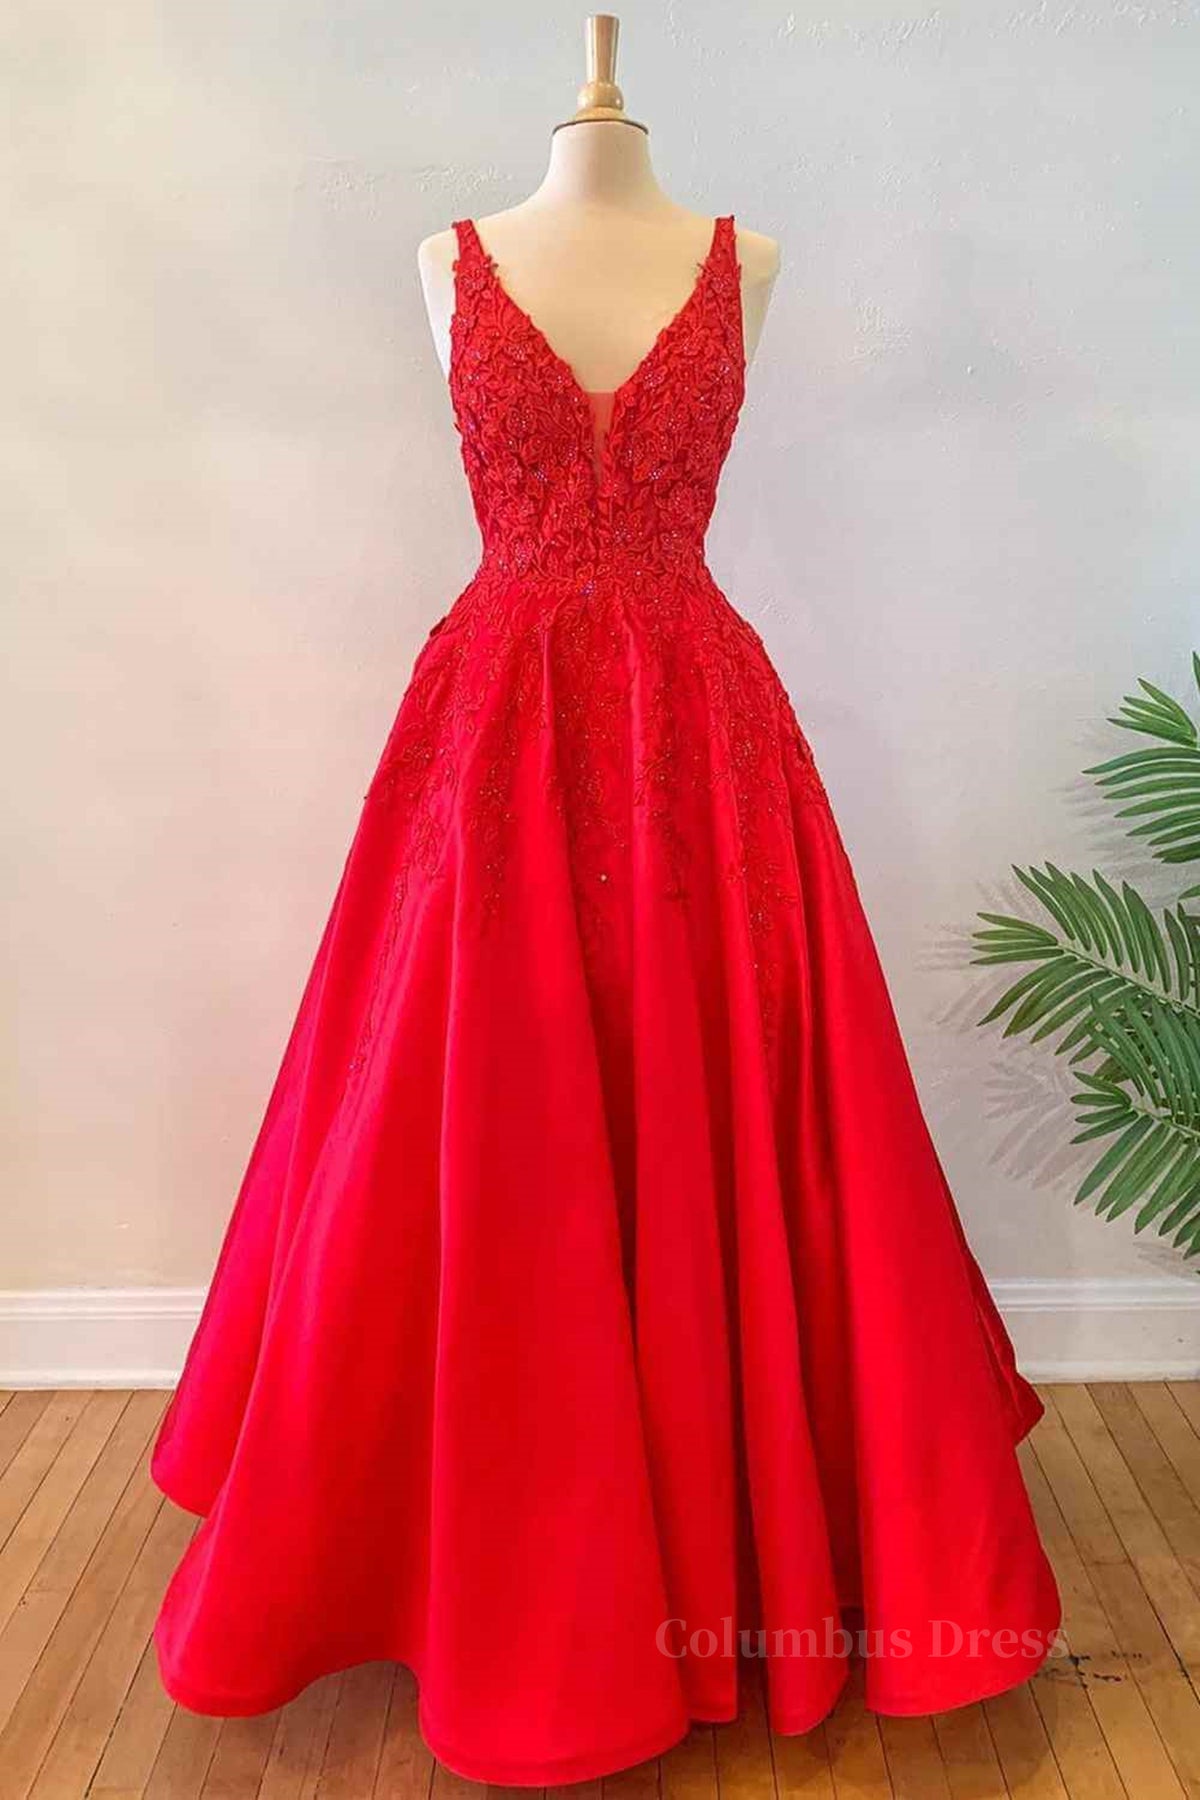 V Neck Open Back Red Lace Long Corset Prom Dress, Red Lace Corset Formal Dress, Beaded Red Evening Dress outfit, Wedding